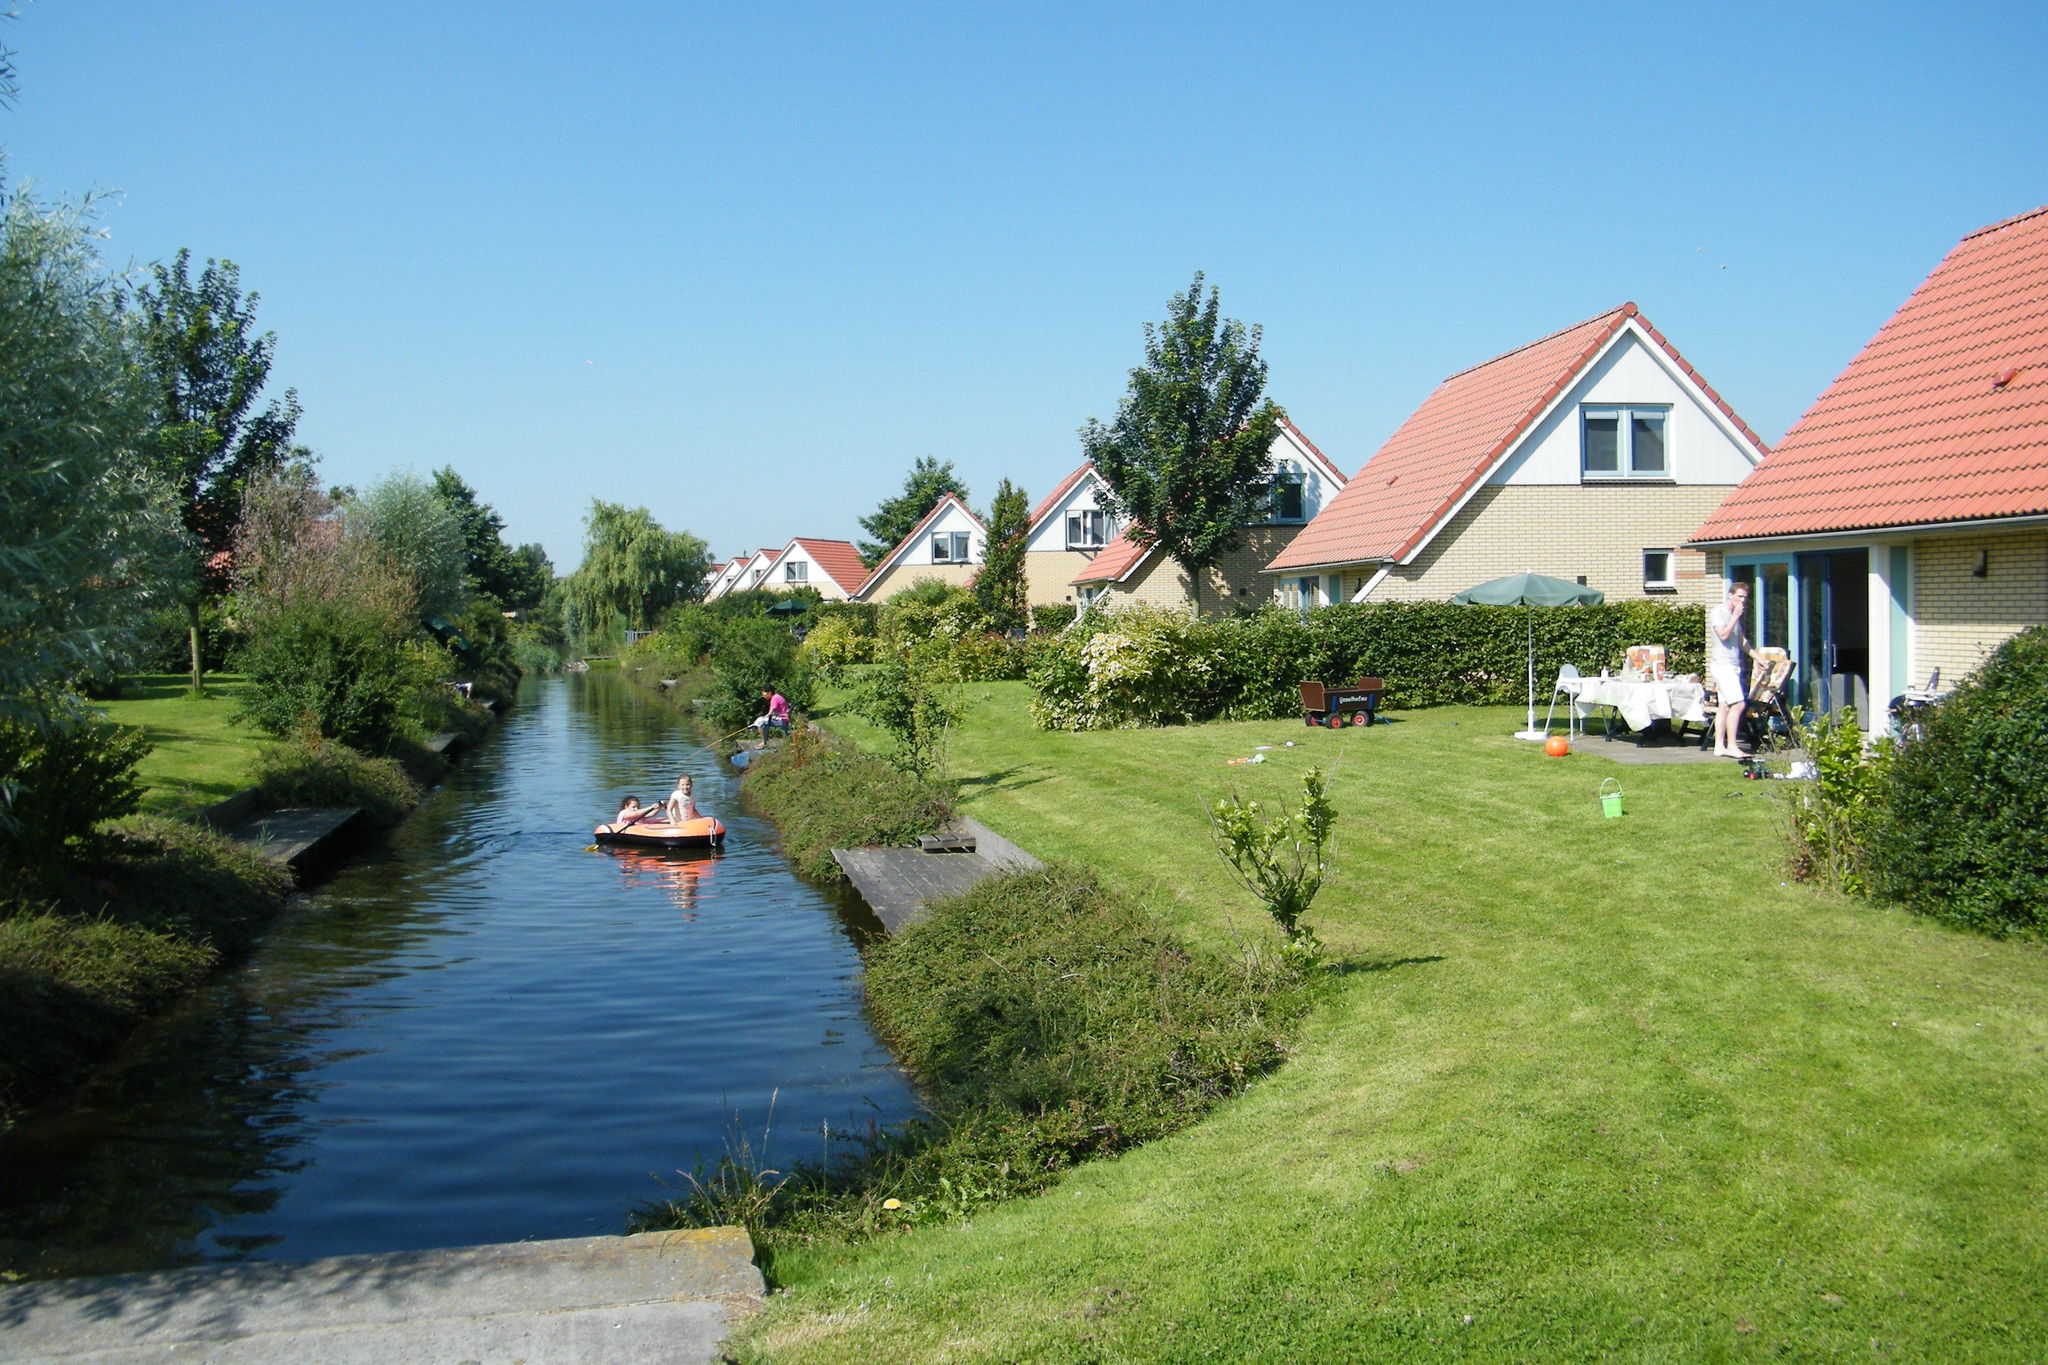 Holiday Home with garden, 19 km. from Hoorn